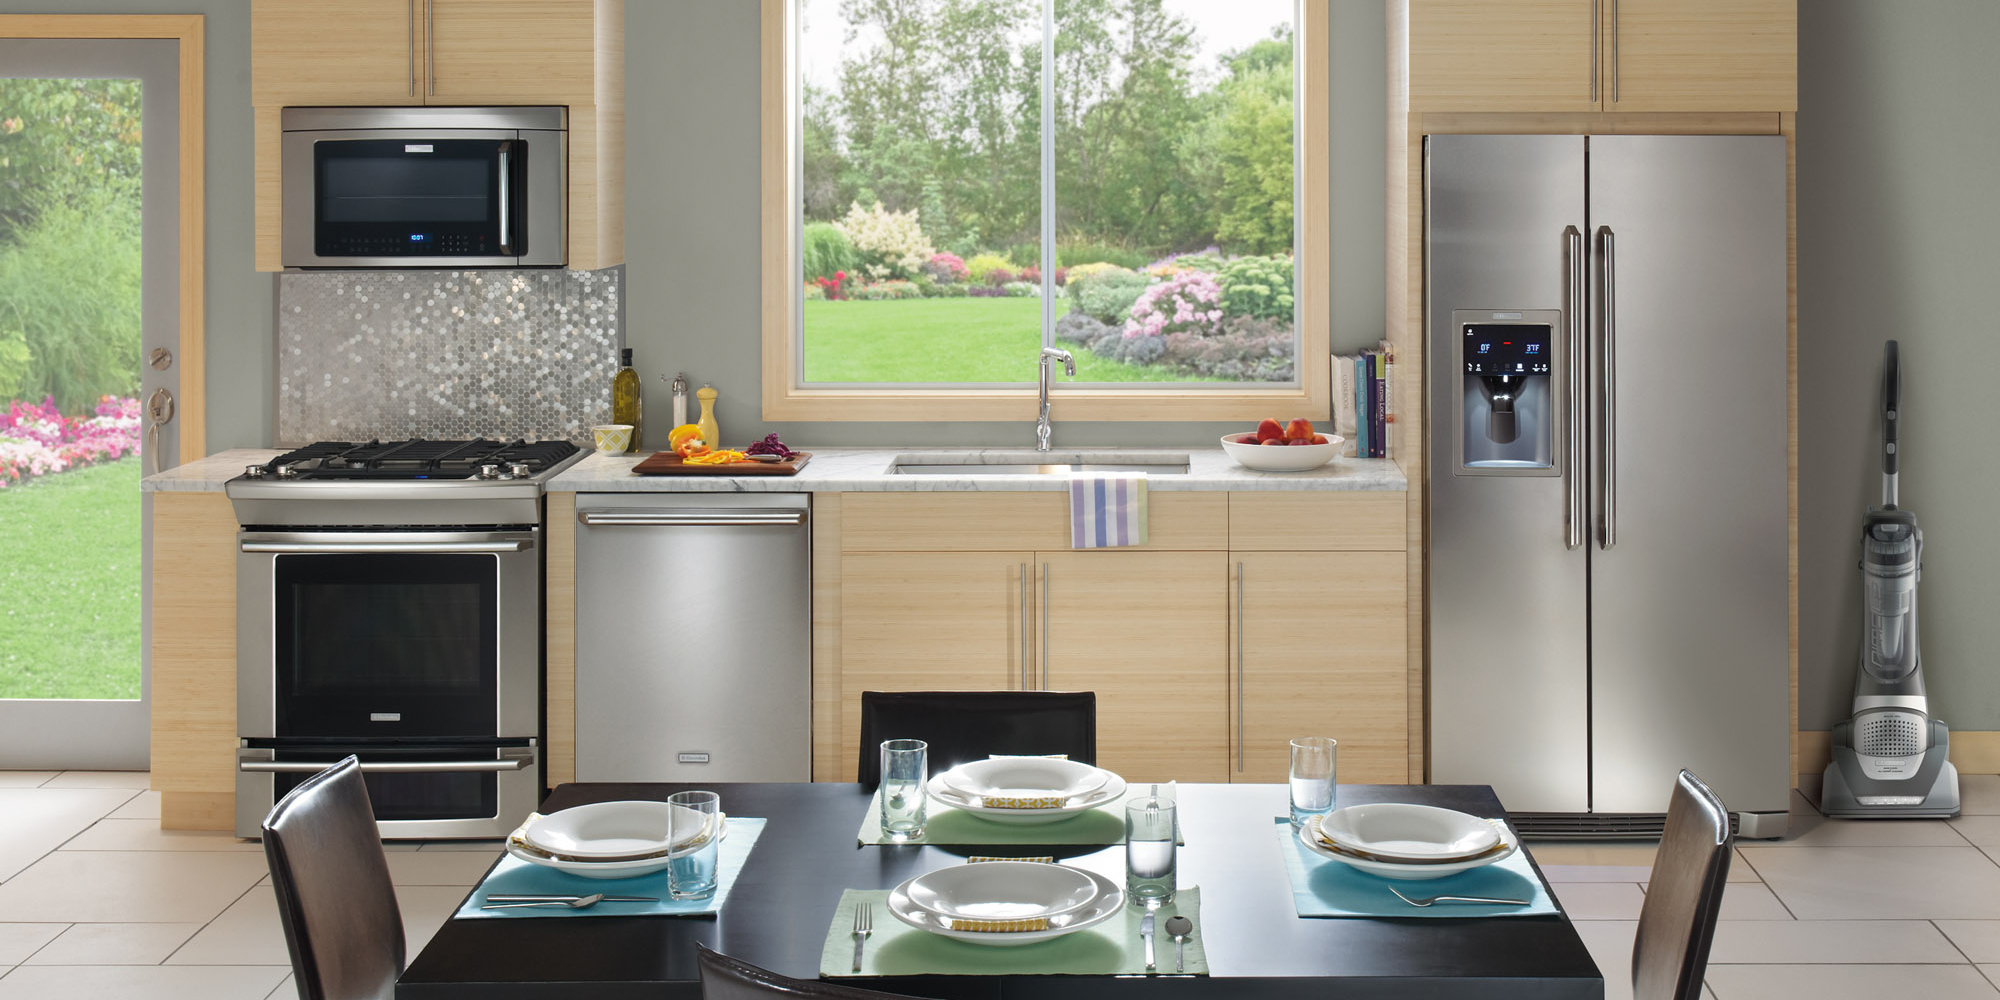 How to Mix Colorful Kitchen Appliances and not Muck It Up - Laurel Home